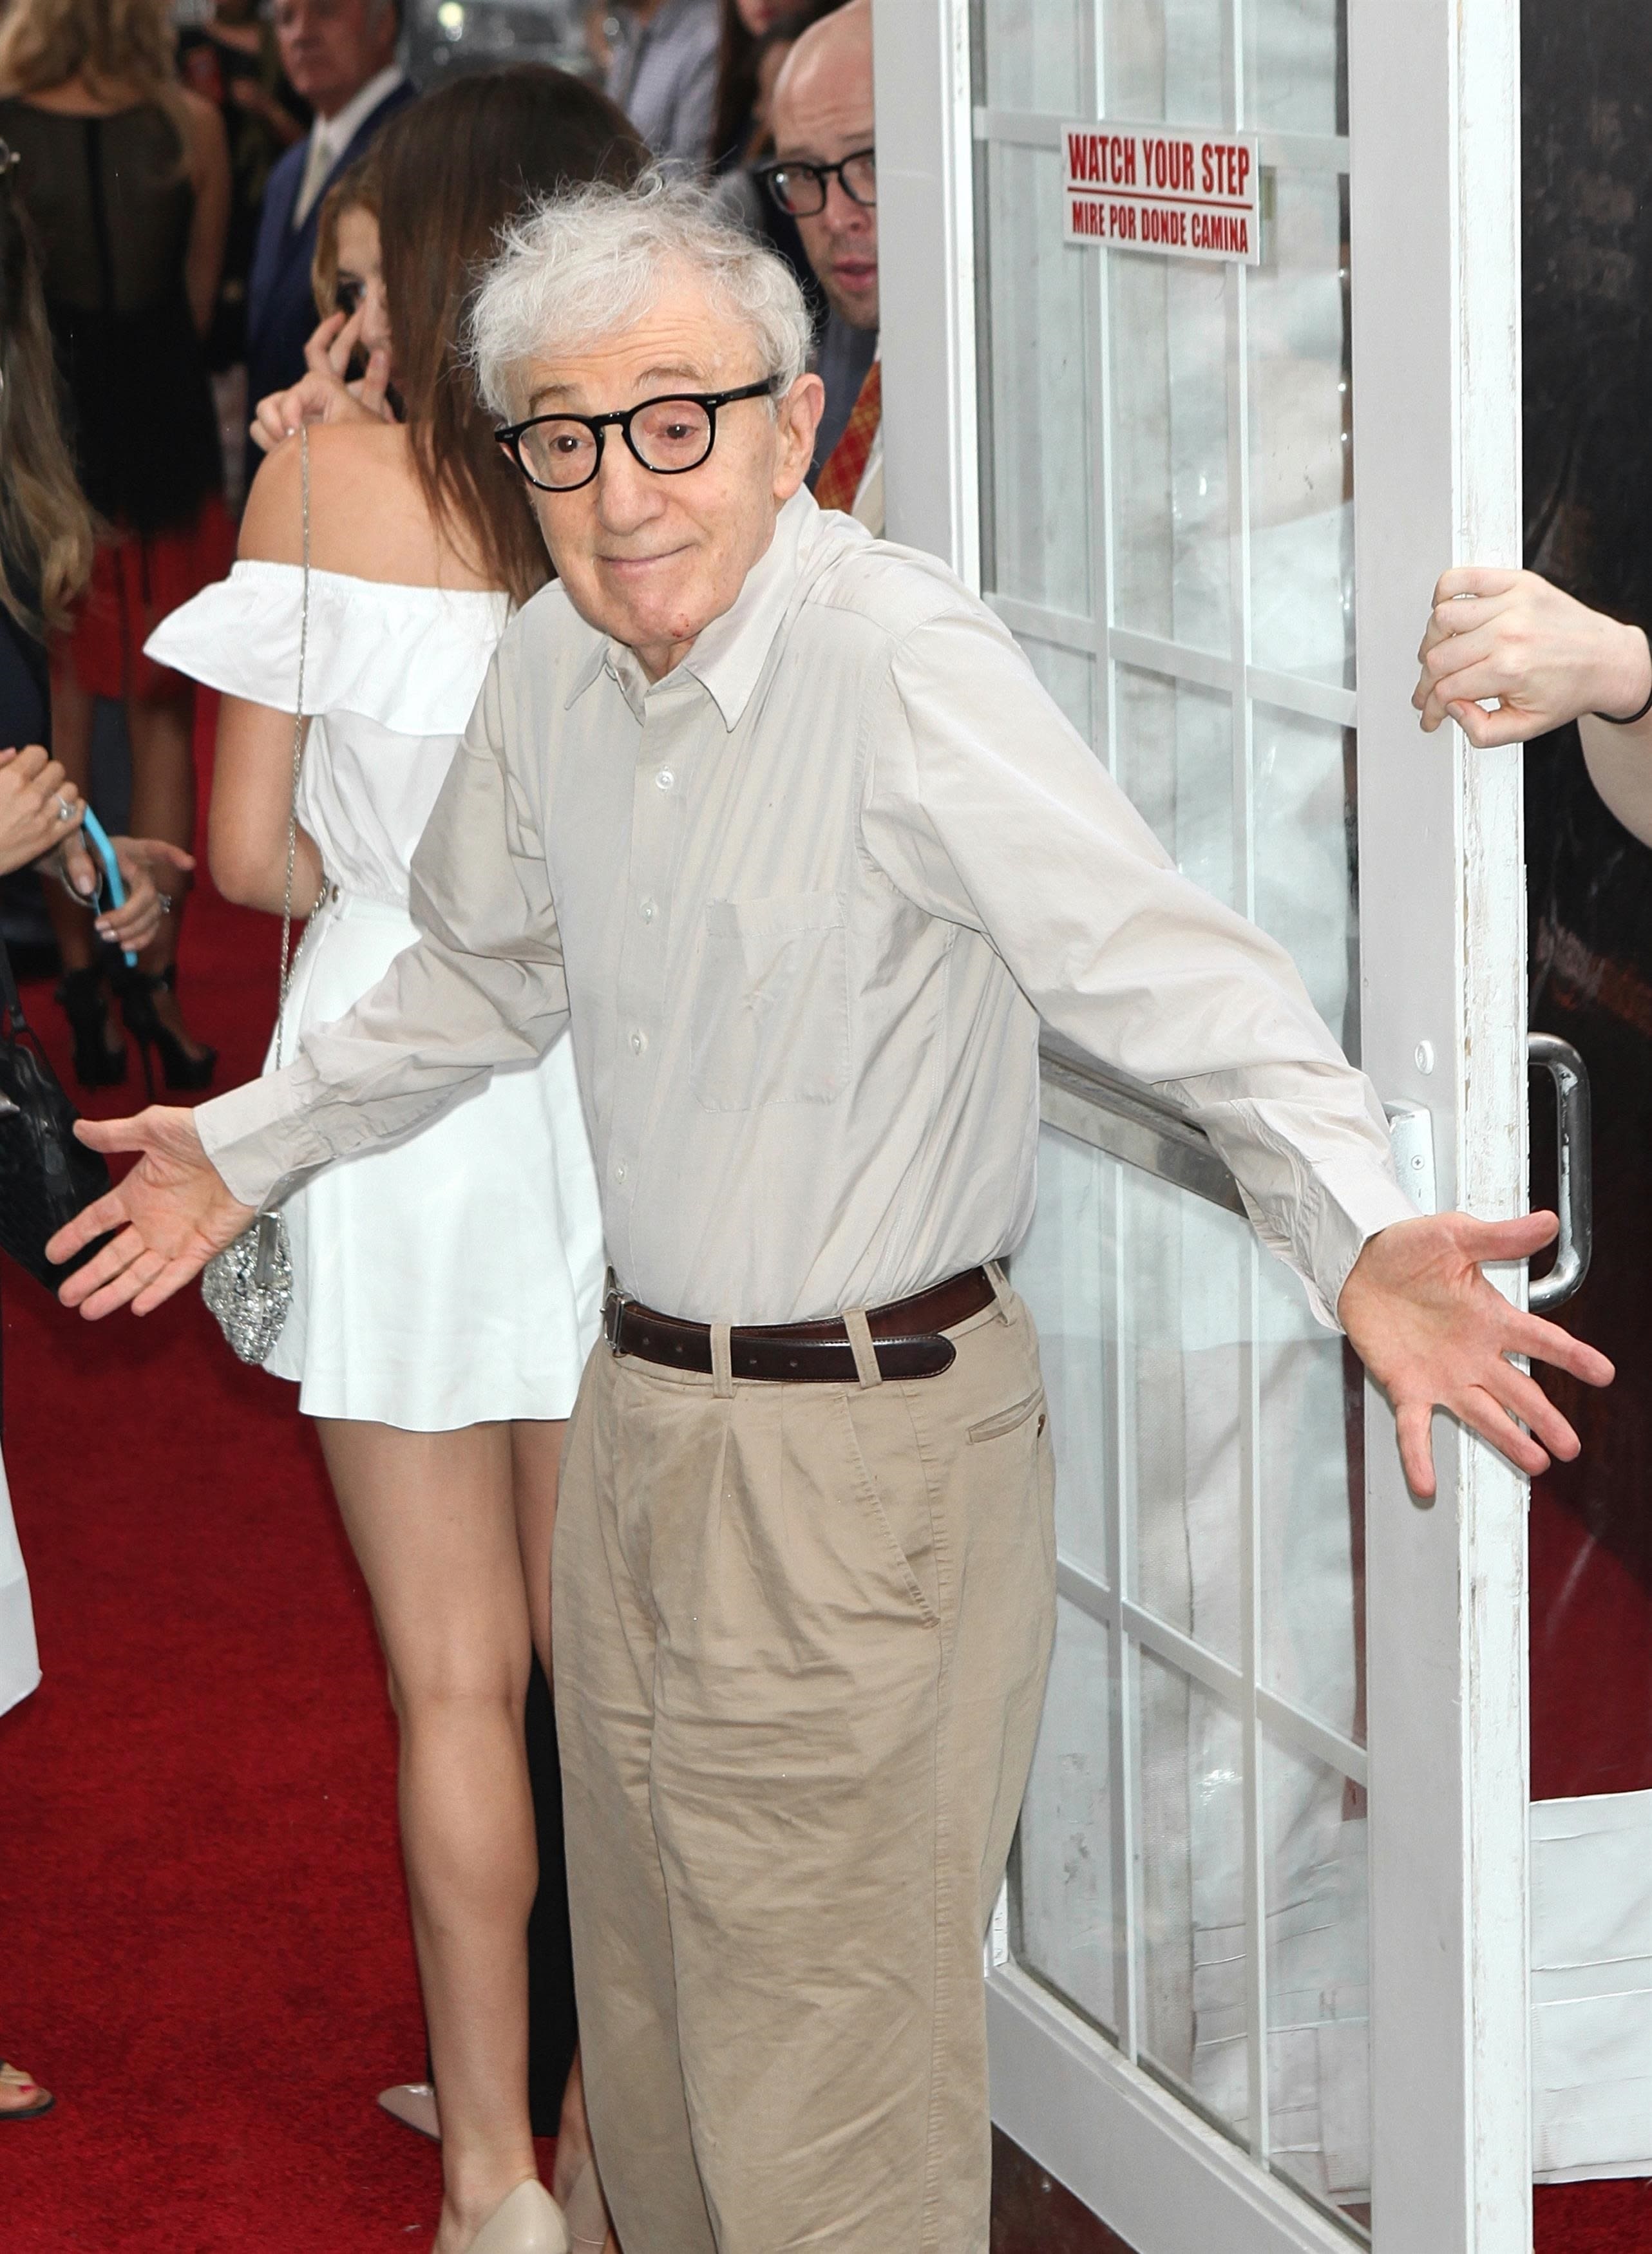 Woody Allen Denies Retirement Report, Claims He "Never Said" He Planned To Stop Directing 